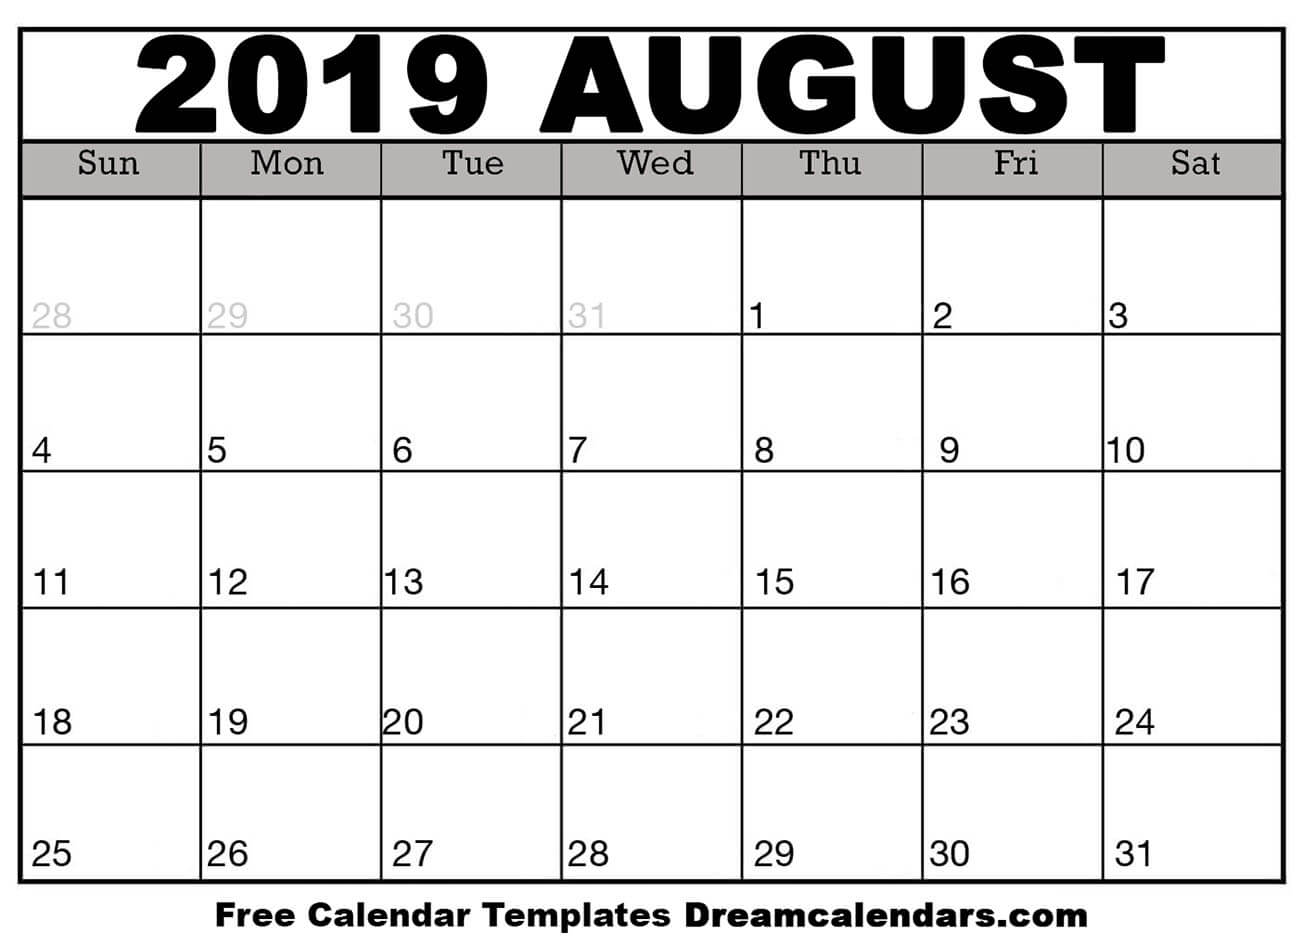 How To A Printed Or Printable Calendar For August 2019